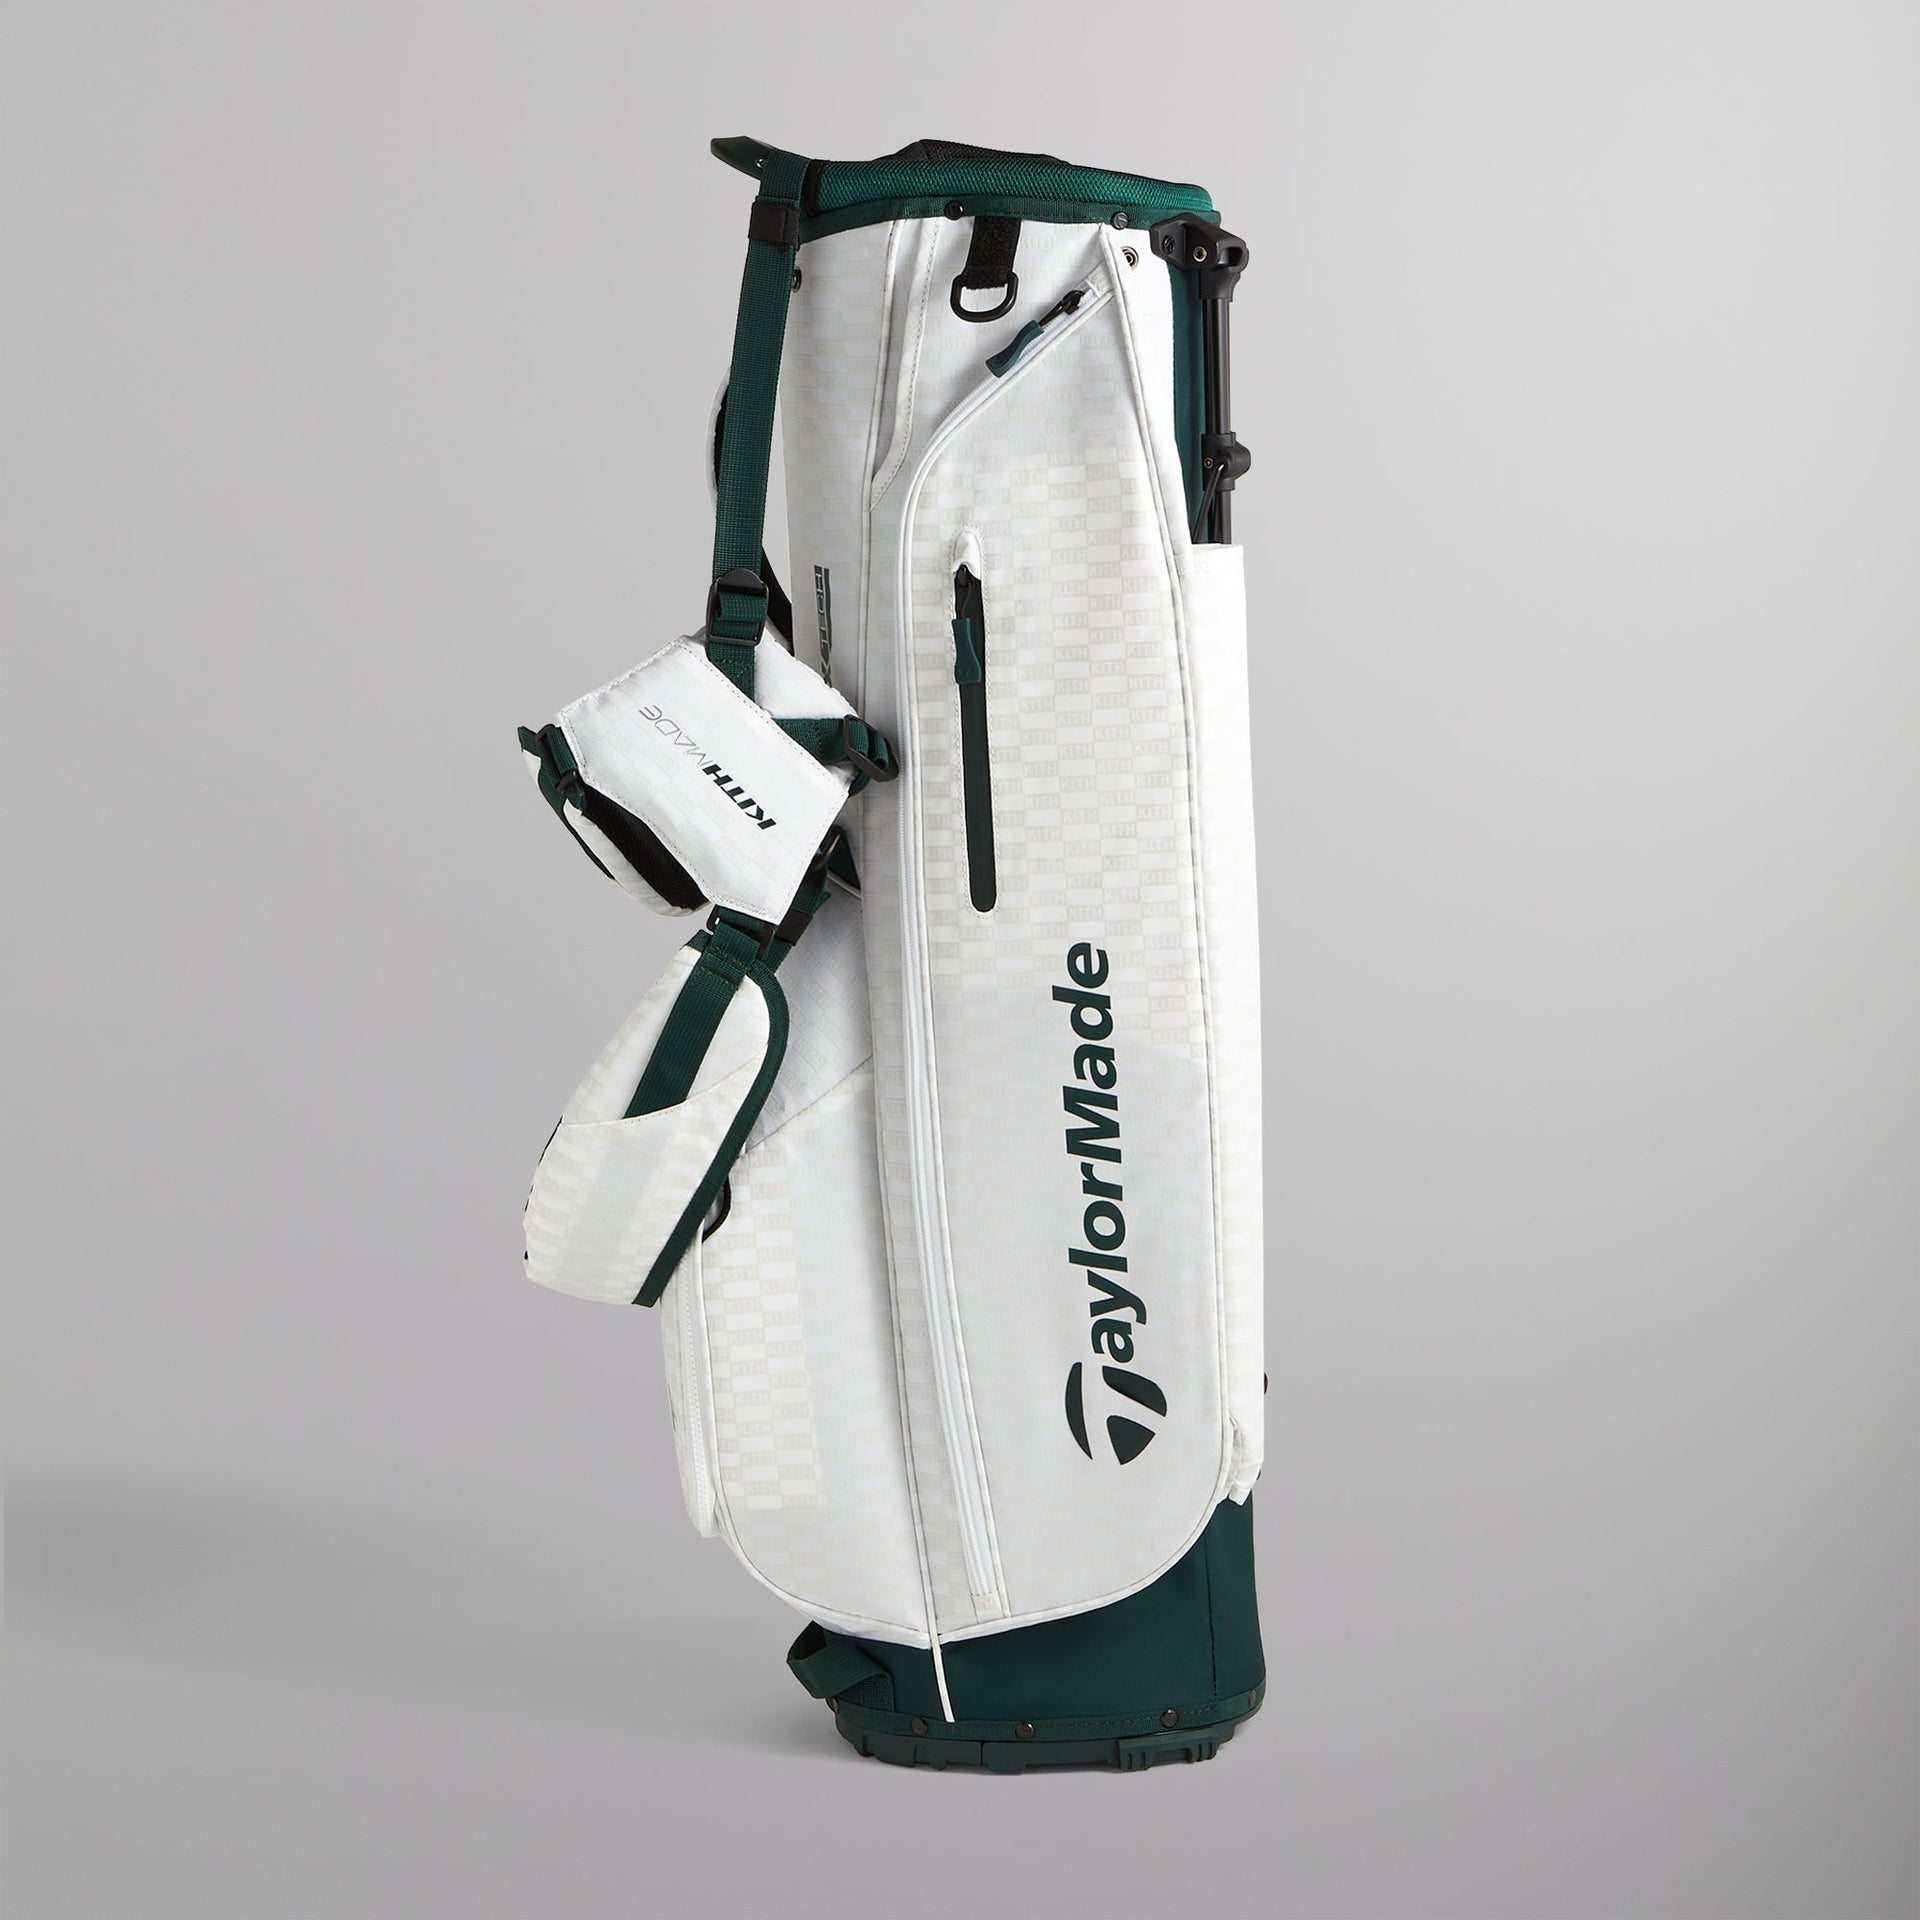 Kith for TaylorMade Flextech Stand Bag - White